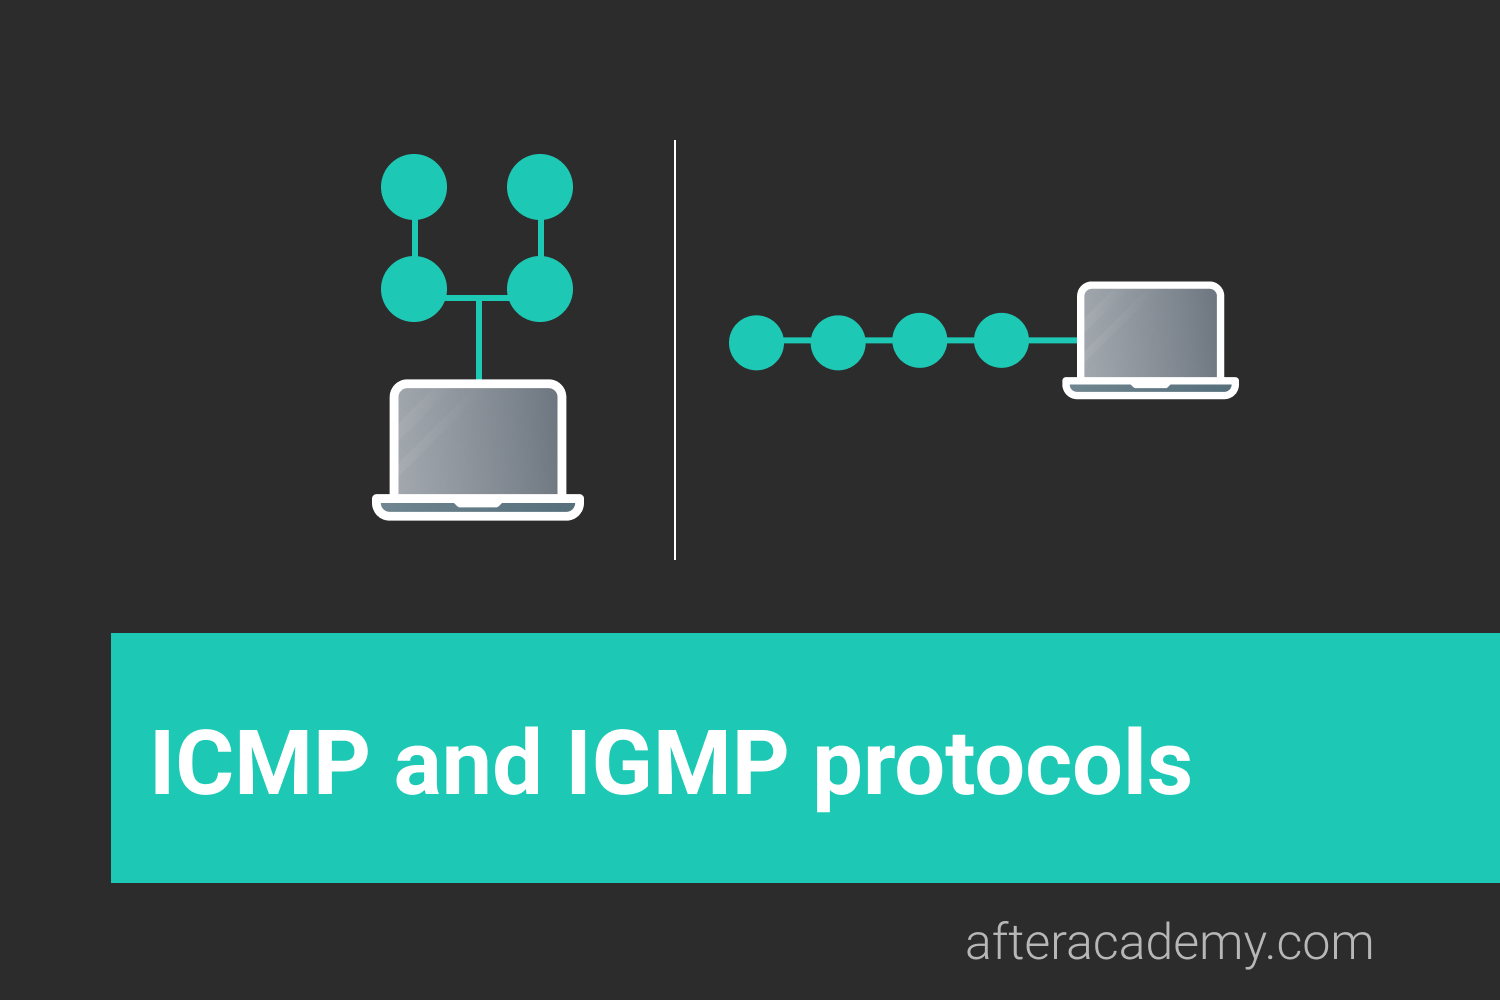 What are ICMP and IGMP protocols?